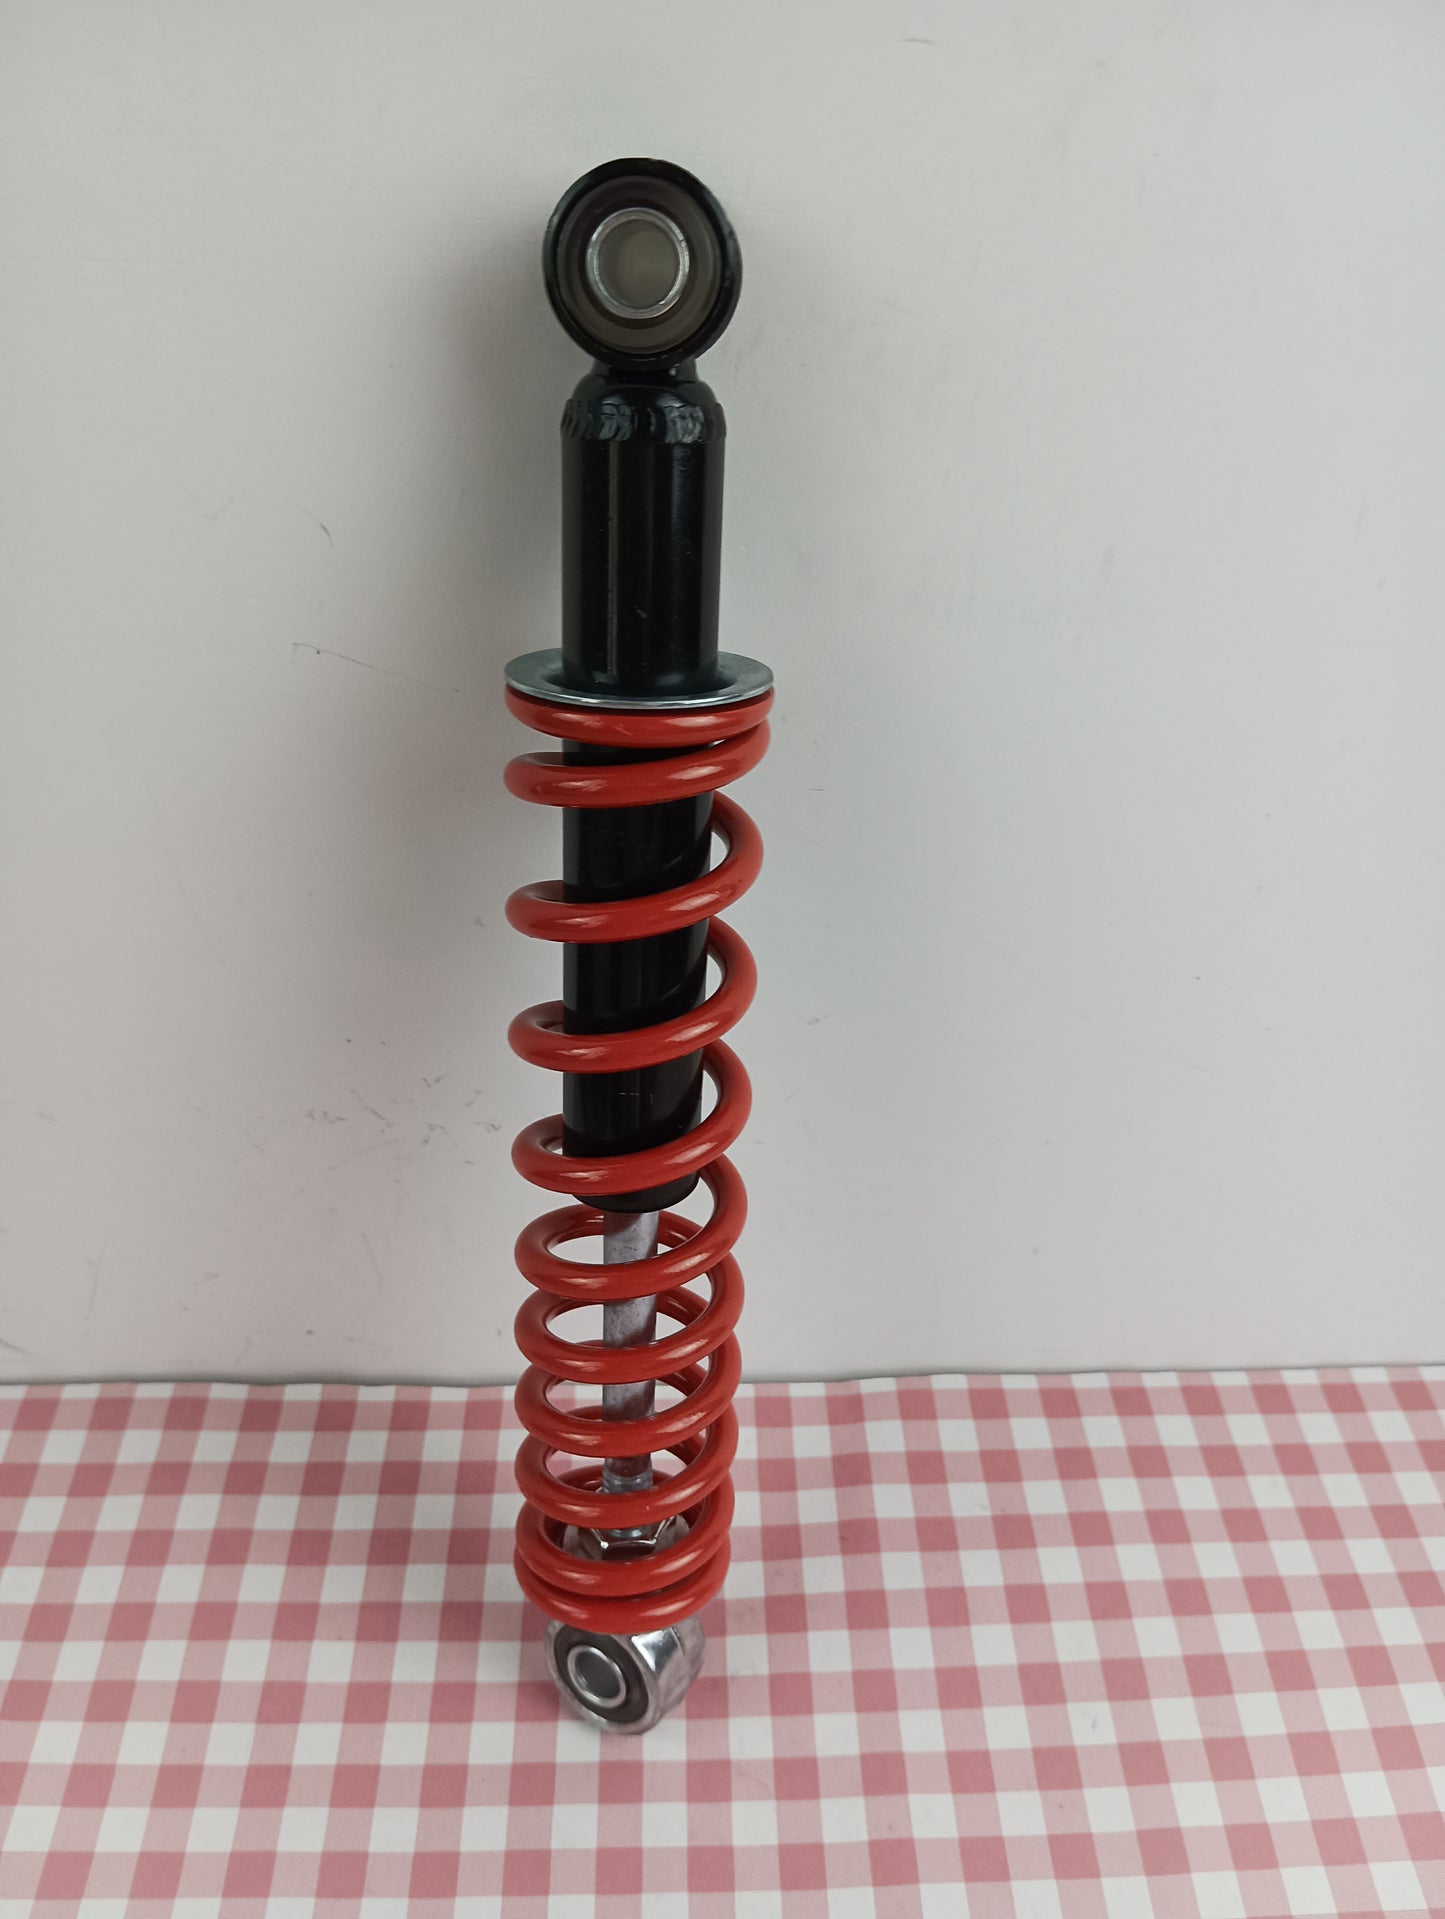 FIFCEDX Shock absorbers for automobiles Suspension Shock Absorbers and Coil Spring Automotive Shock Absorbers Double Stage Spring Shock Absorbers Impact Metal Hydraulic Shock Absorbers Negative Pressure Hydraulic Metal Shock Absorbers for Automobiles